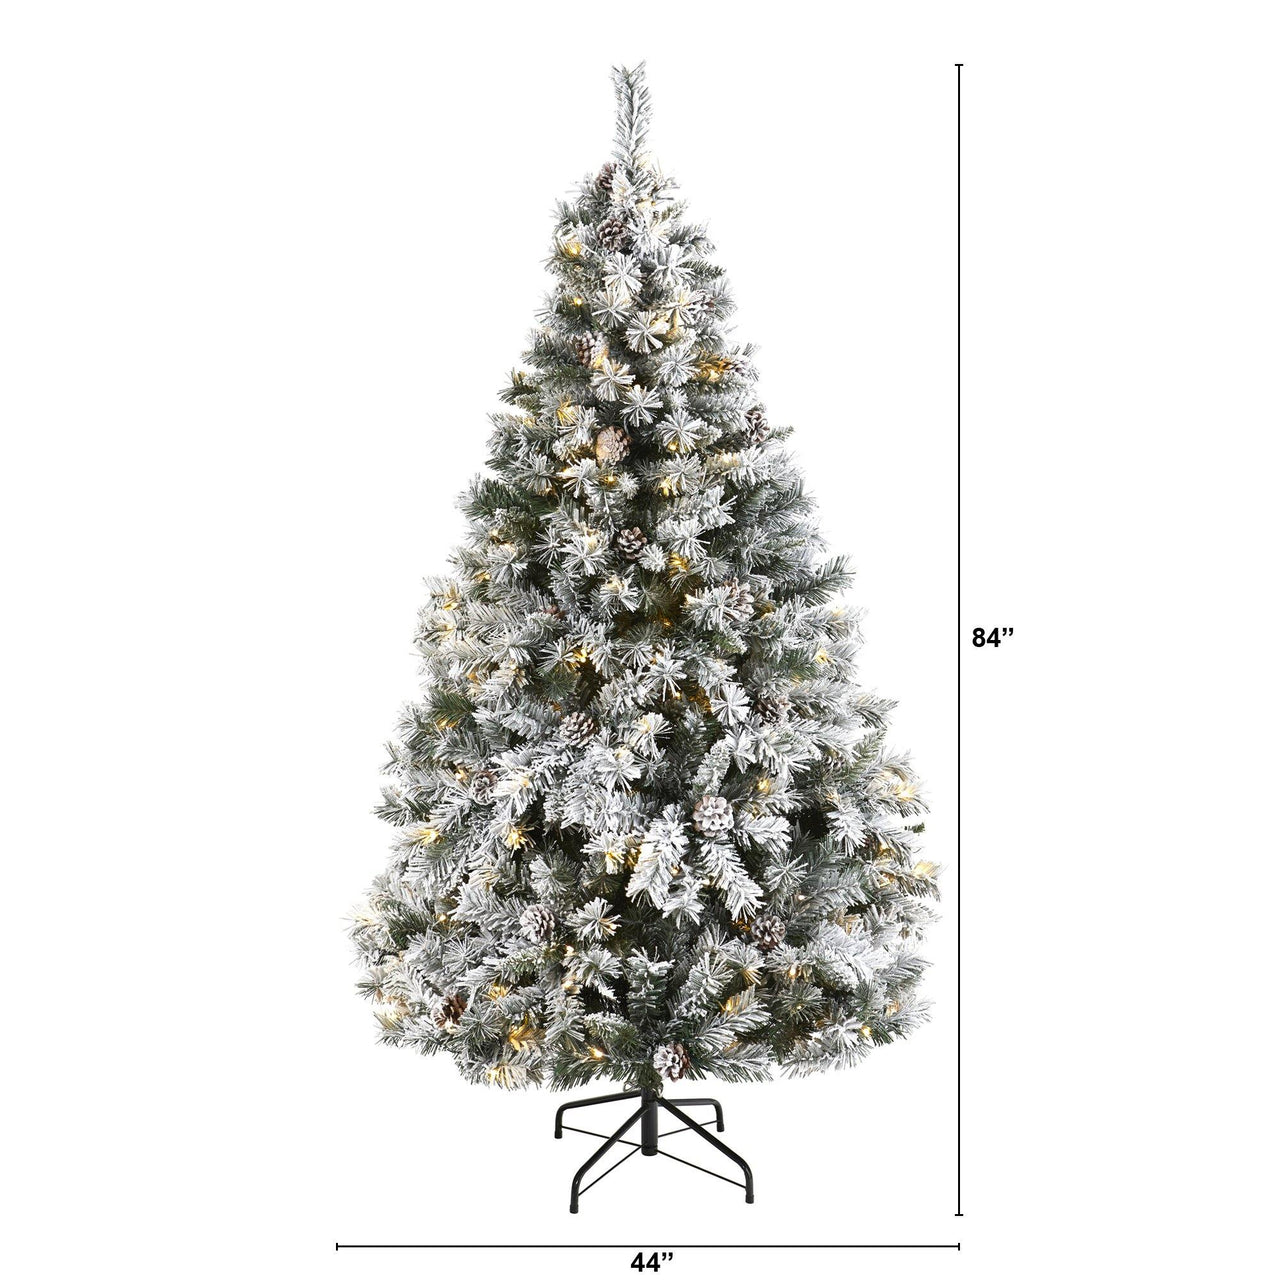 6' Flocked White River Mountain Pine Artificial Christmas Tree with Pinecones and 250 Clear LED Lights - The Fox Decor